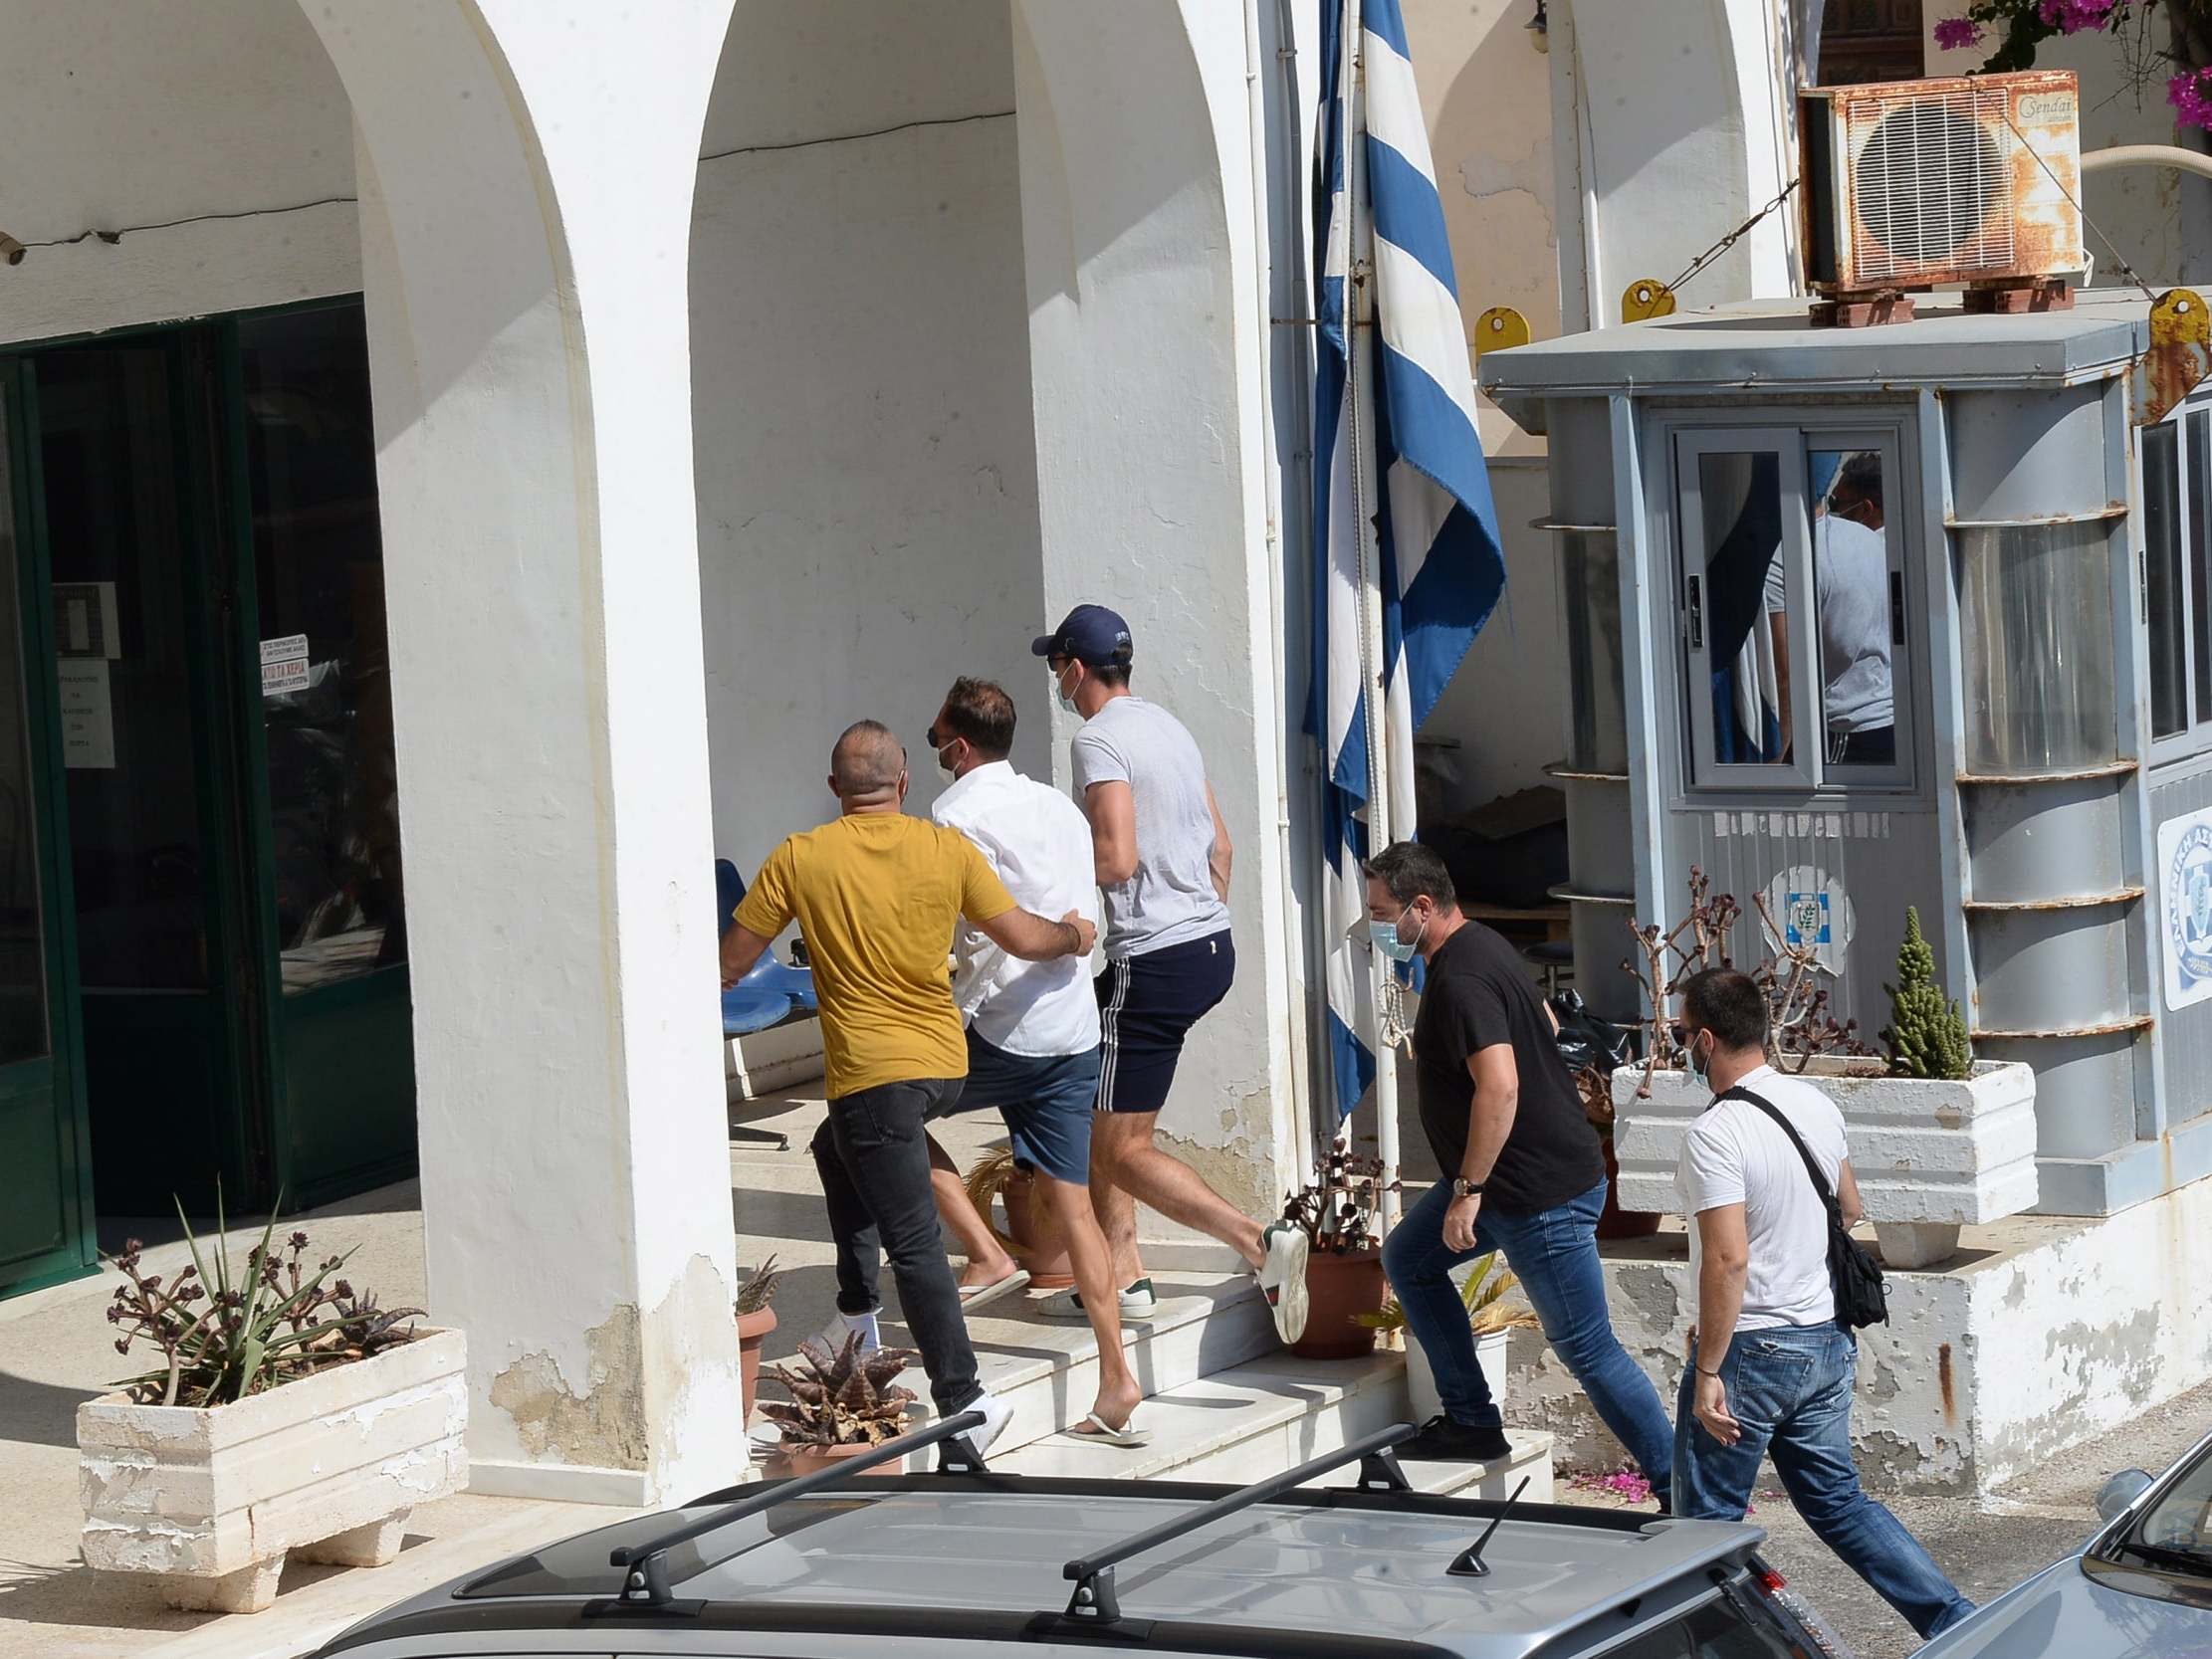 Manchester United captain Harry Maguire, wearing a cap, arrives at court in Syros, Greece